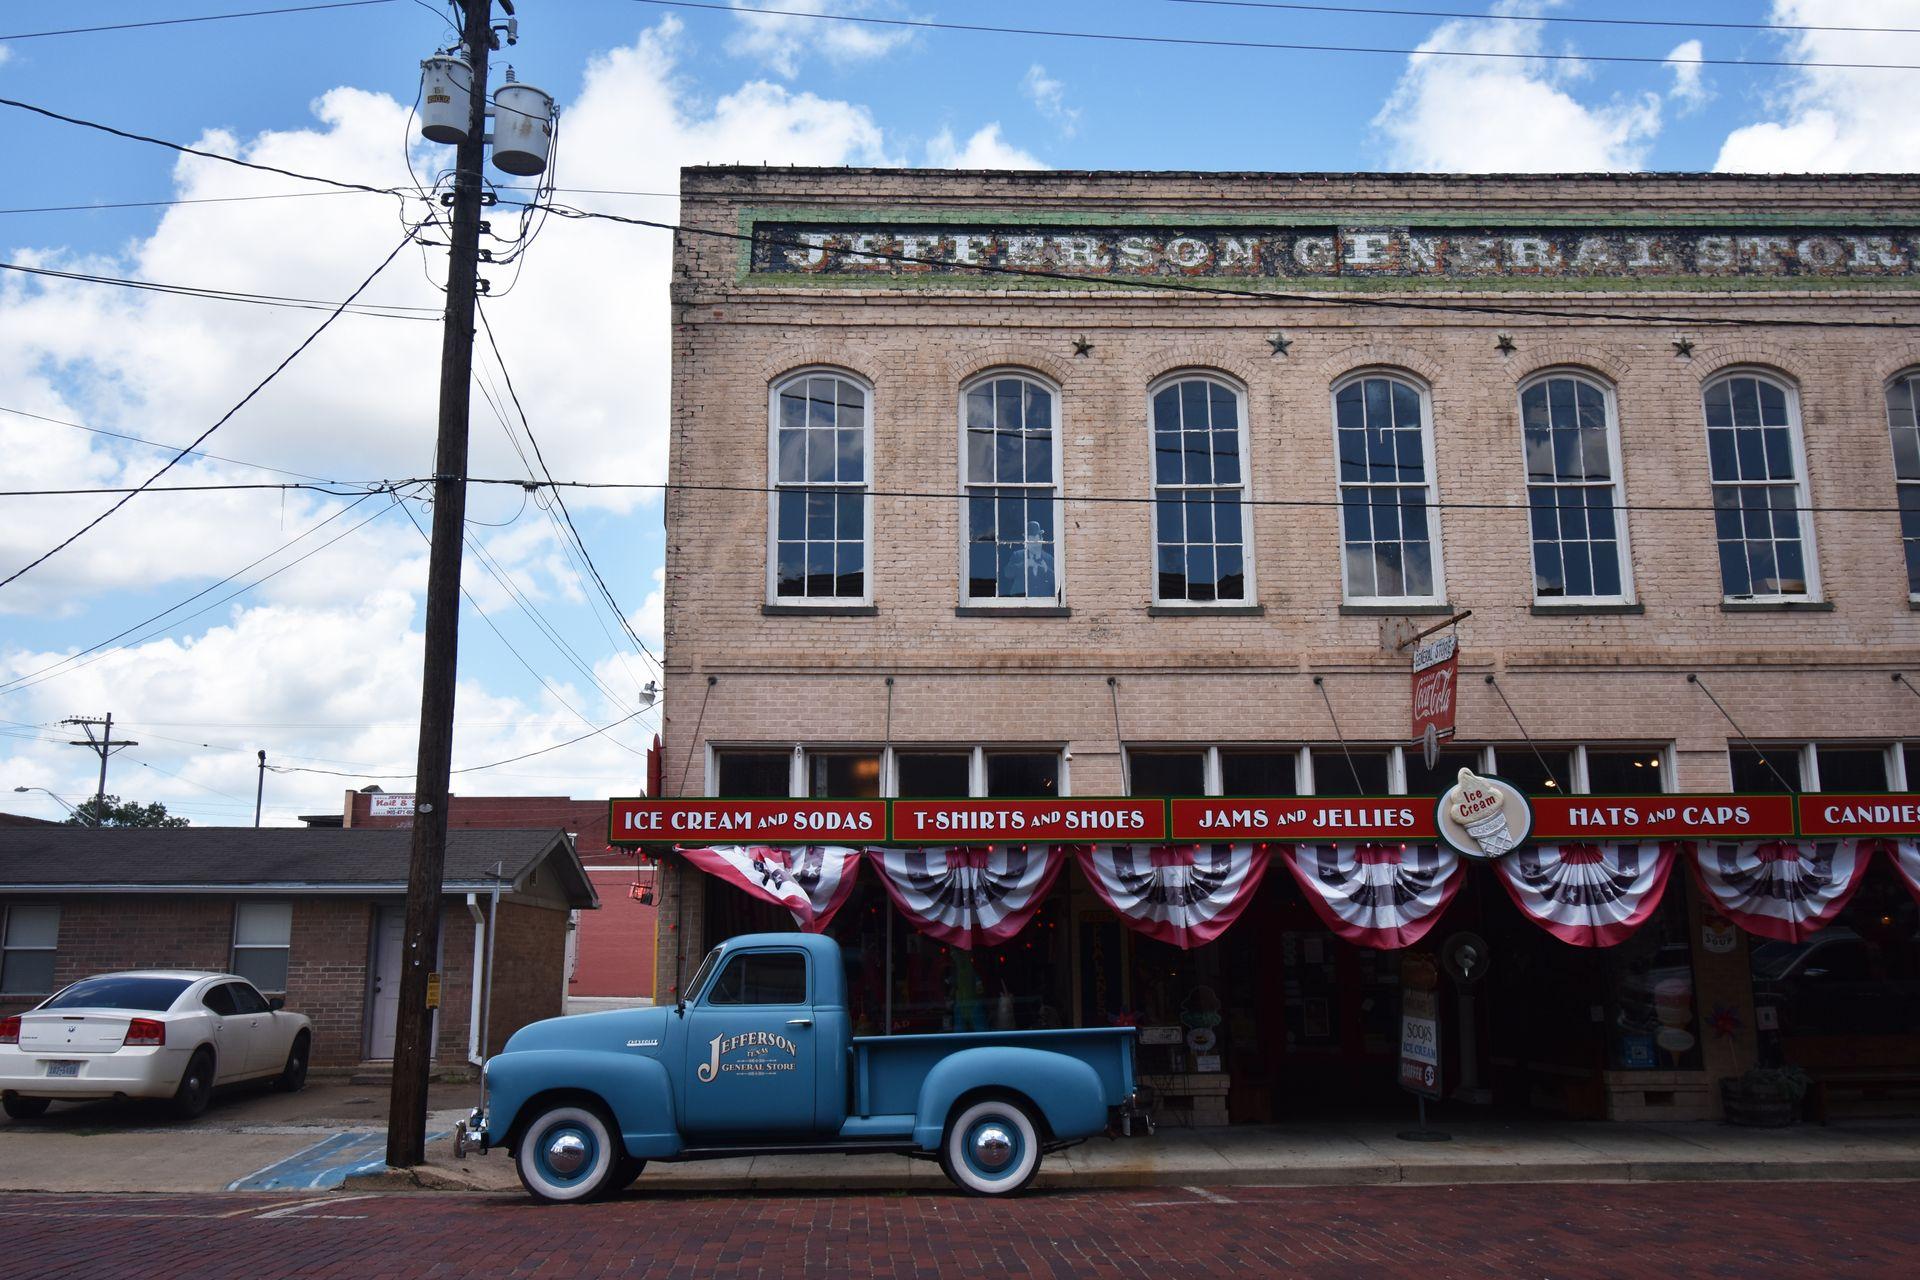 The exterior of the Jefferson General Store. There is a vintage blue pick up truck parked outside, red, white and blue awnings and signage saying "ice cream and soda," "t-shirts and shoes" and "jams and jellies"